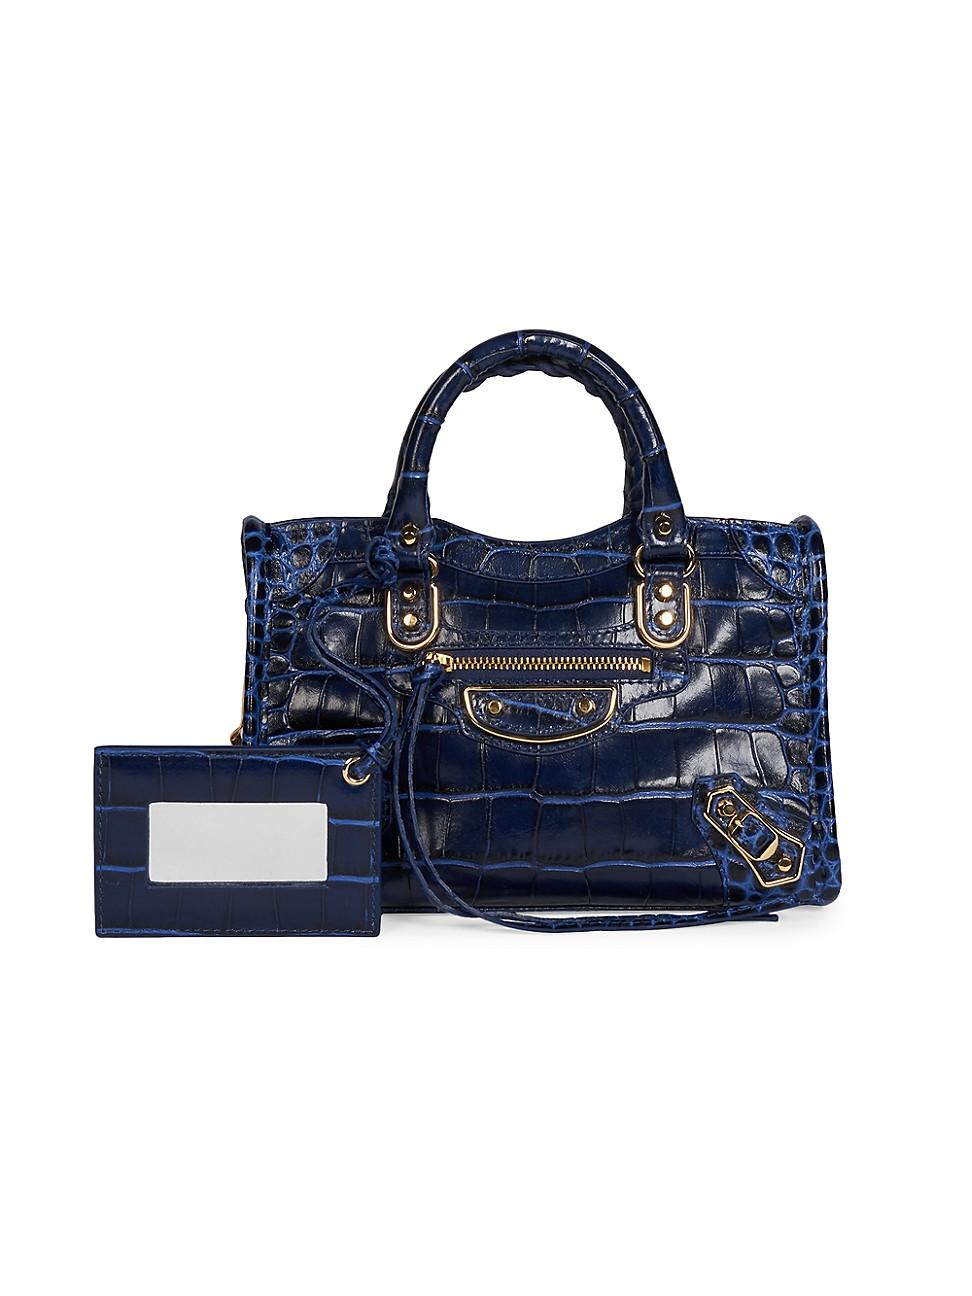 Balenciaga Small City Croc-embossed Leather Satchel in Navy Croc (Blue) |  Lyst